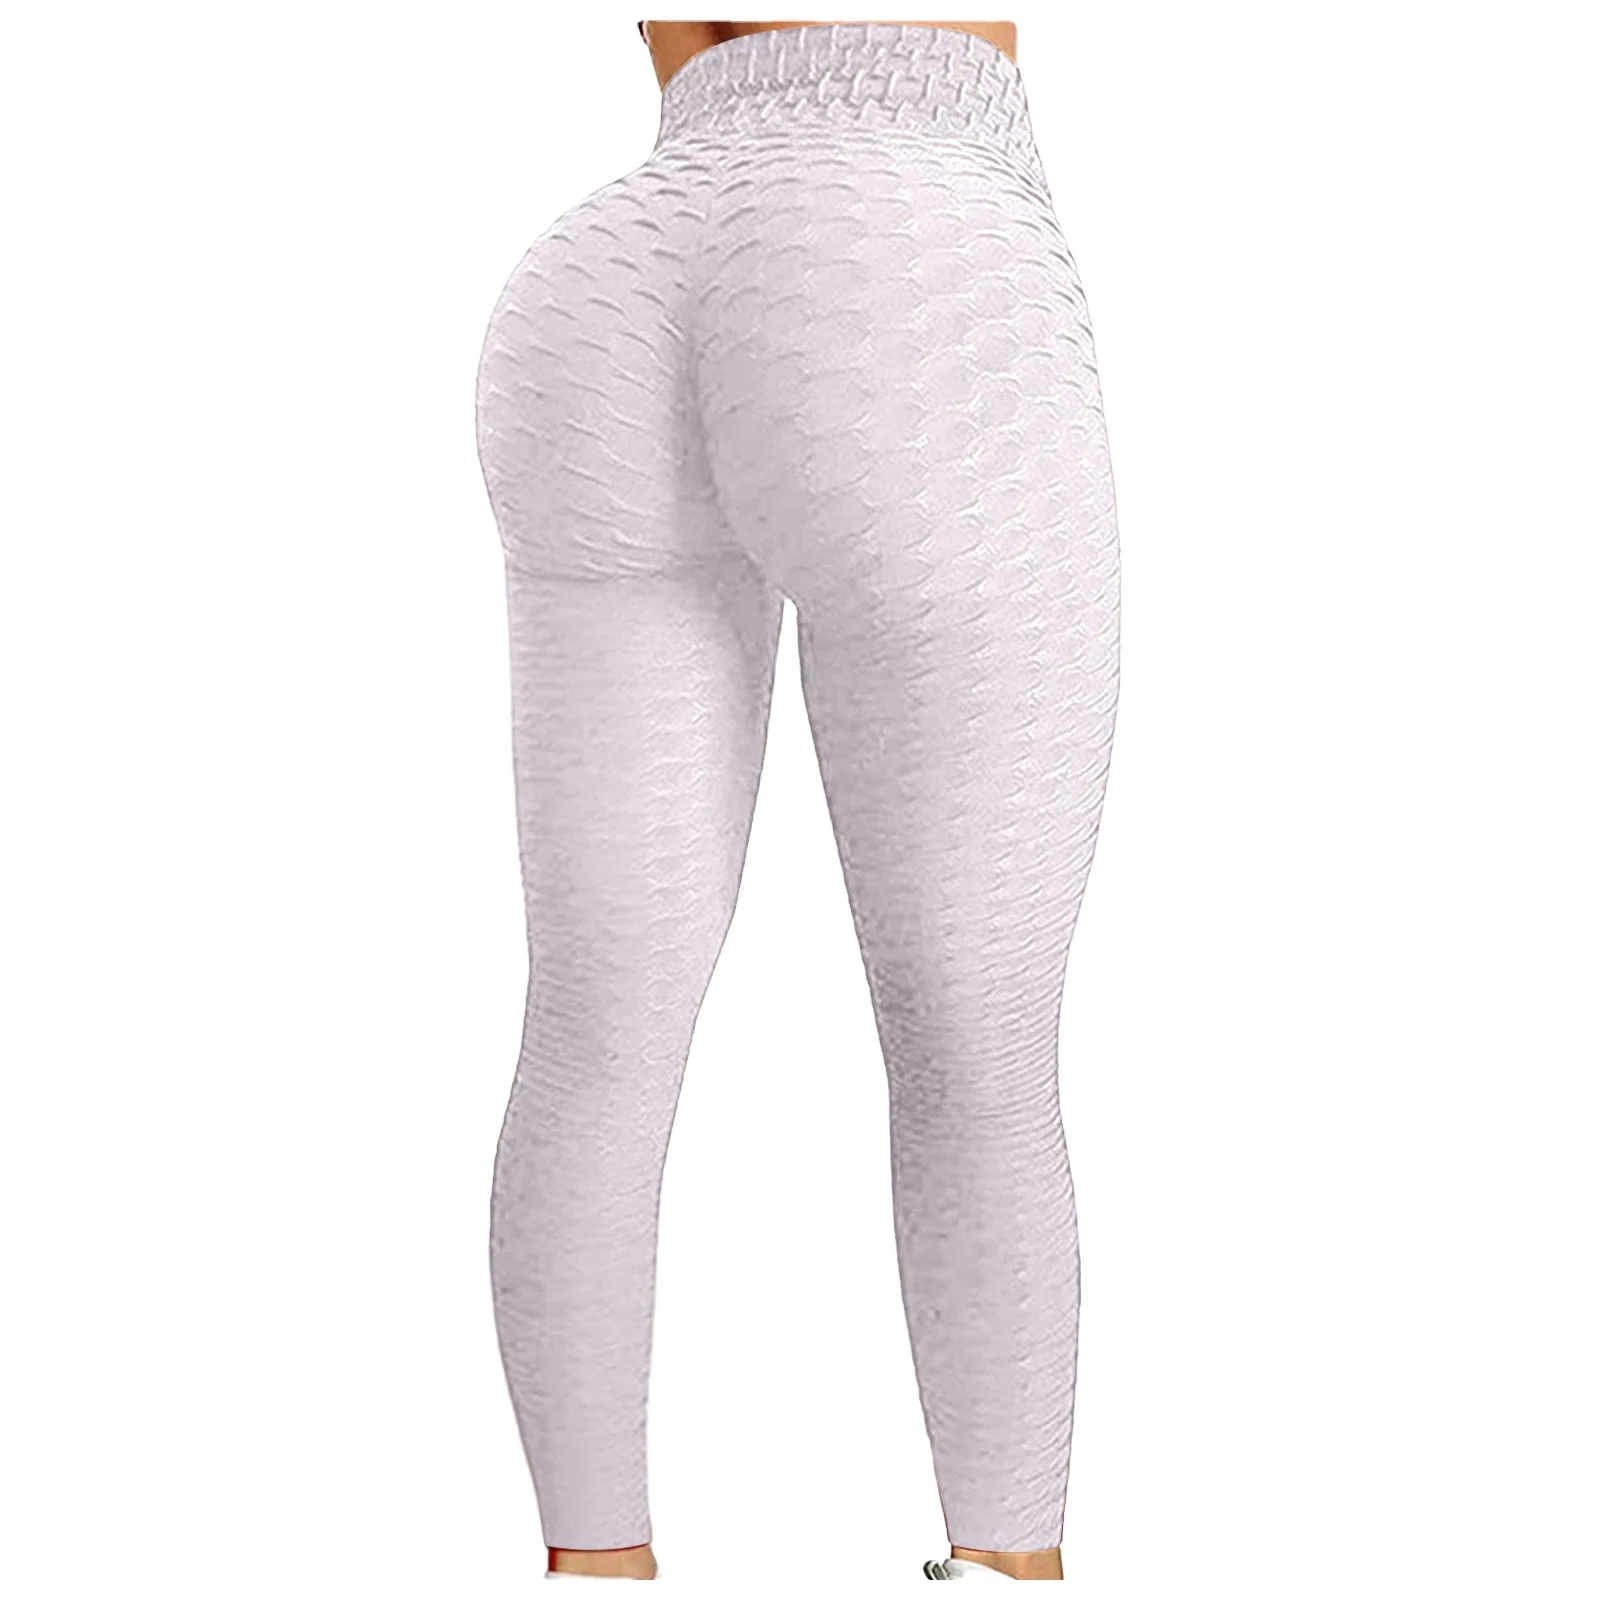 

Amazon top seller 2021 Ladies Colorful Butt Lifting Fitness Tight High Waist Booty Workout Yoga Pants Leggings, Picture shows